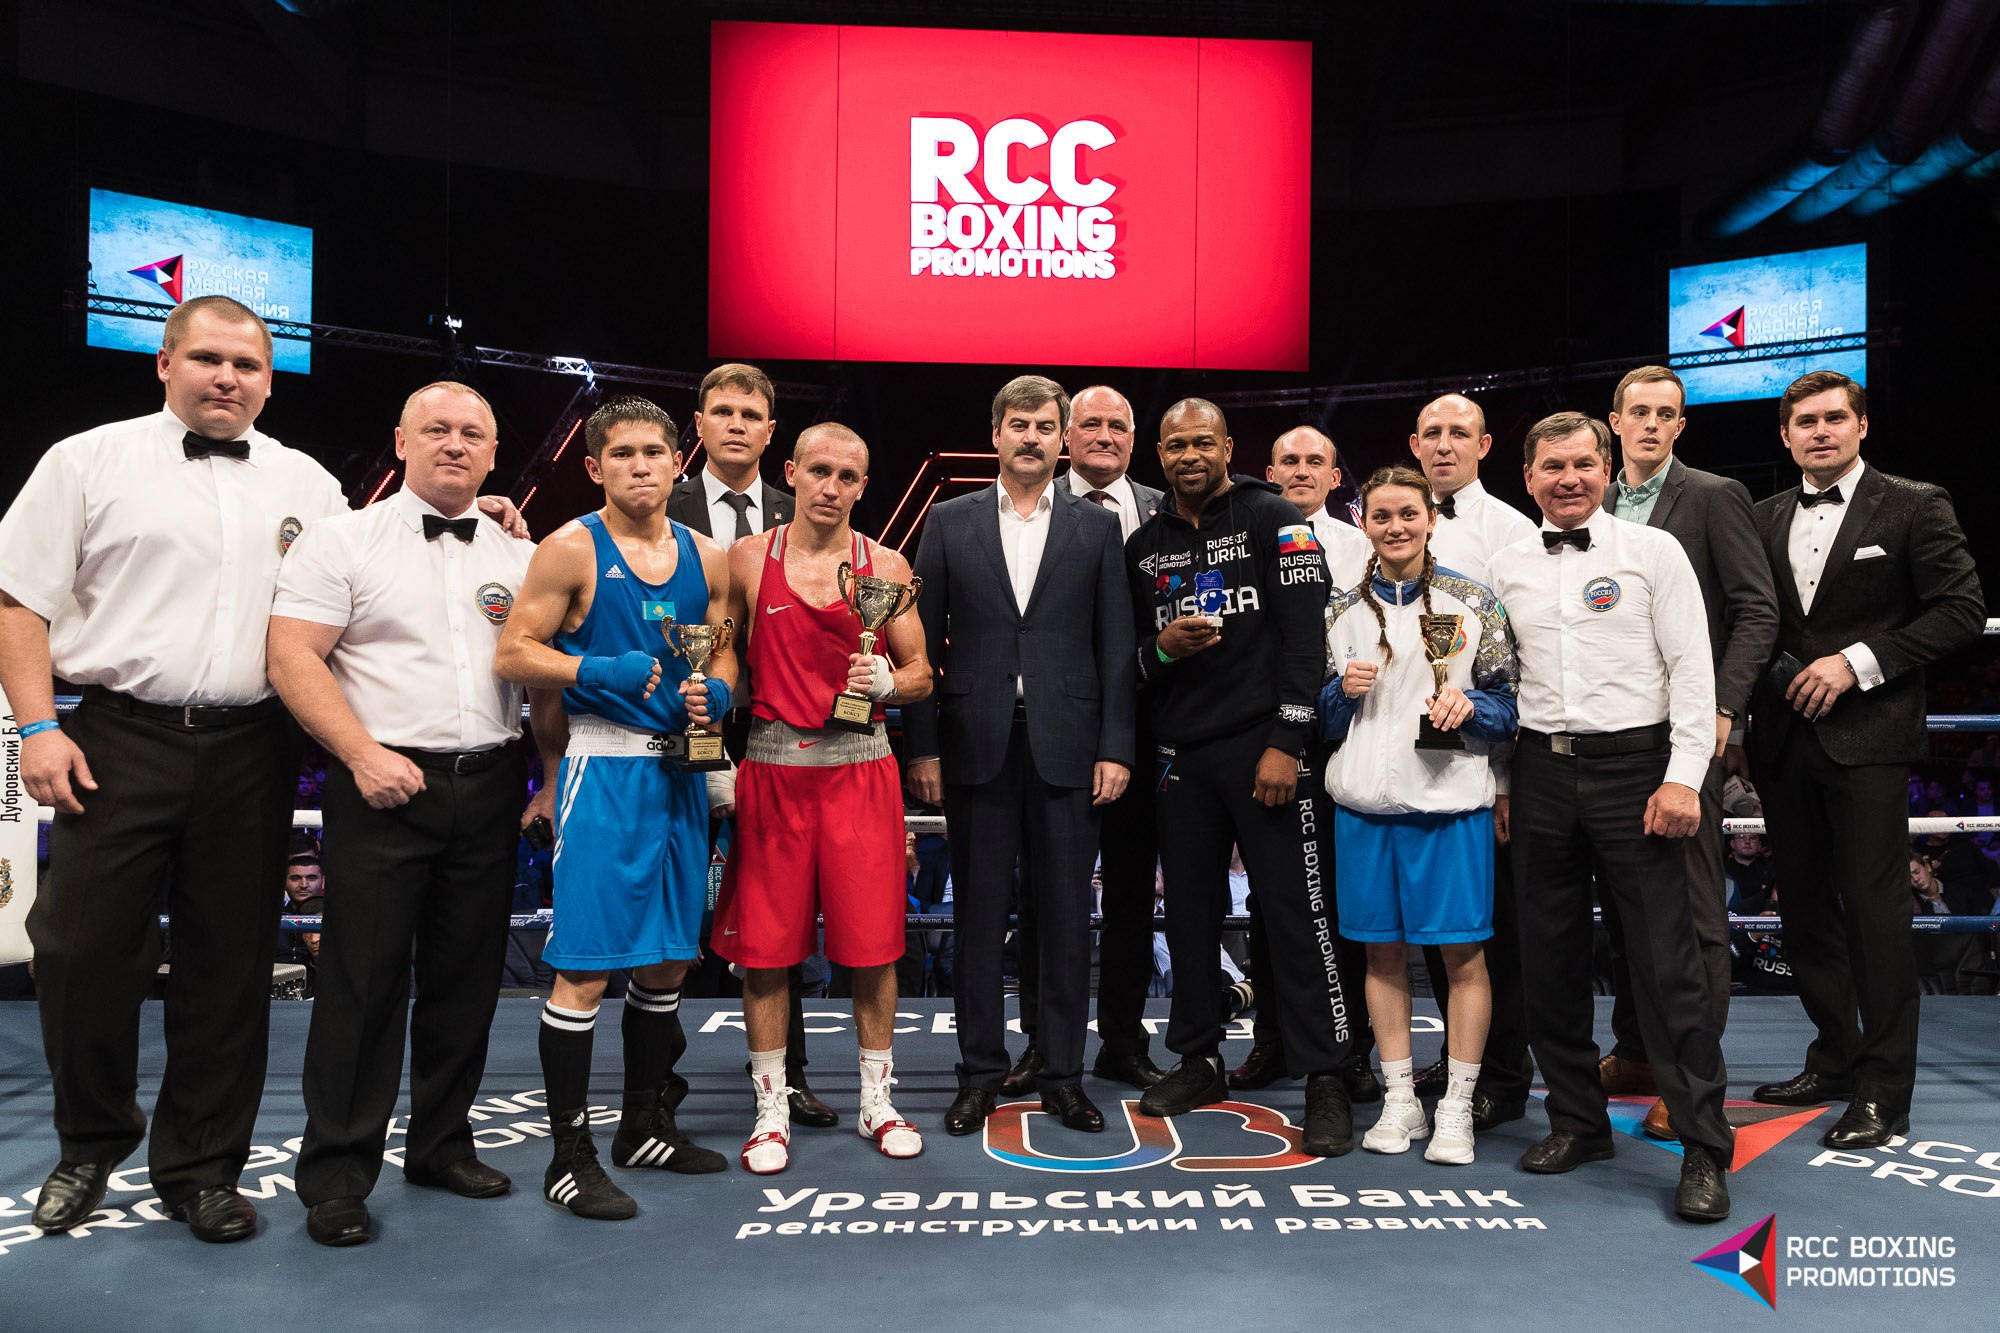 Boxing promotions. РМК Boxing. Рсс боксинг. РМК боксинг промоушен. Ural Boxing promotion.